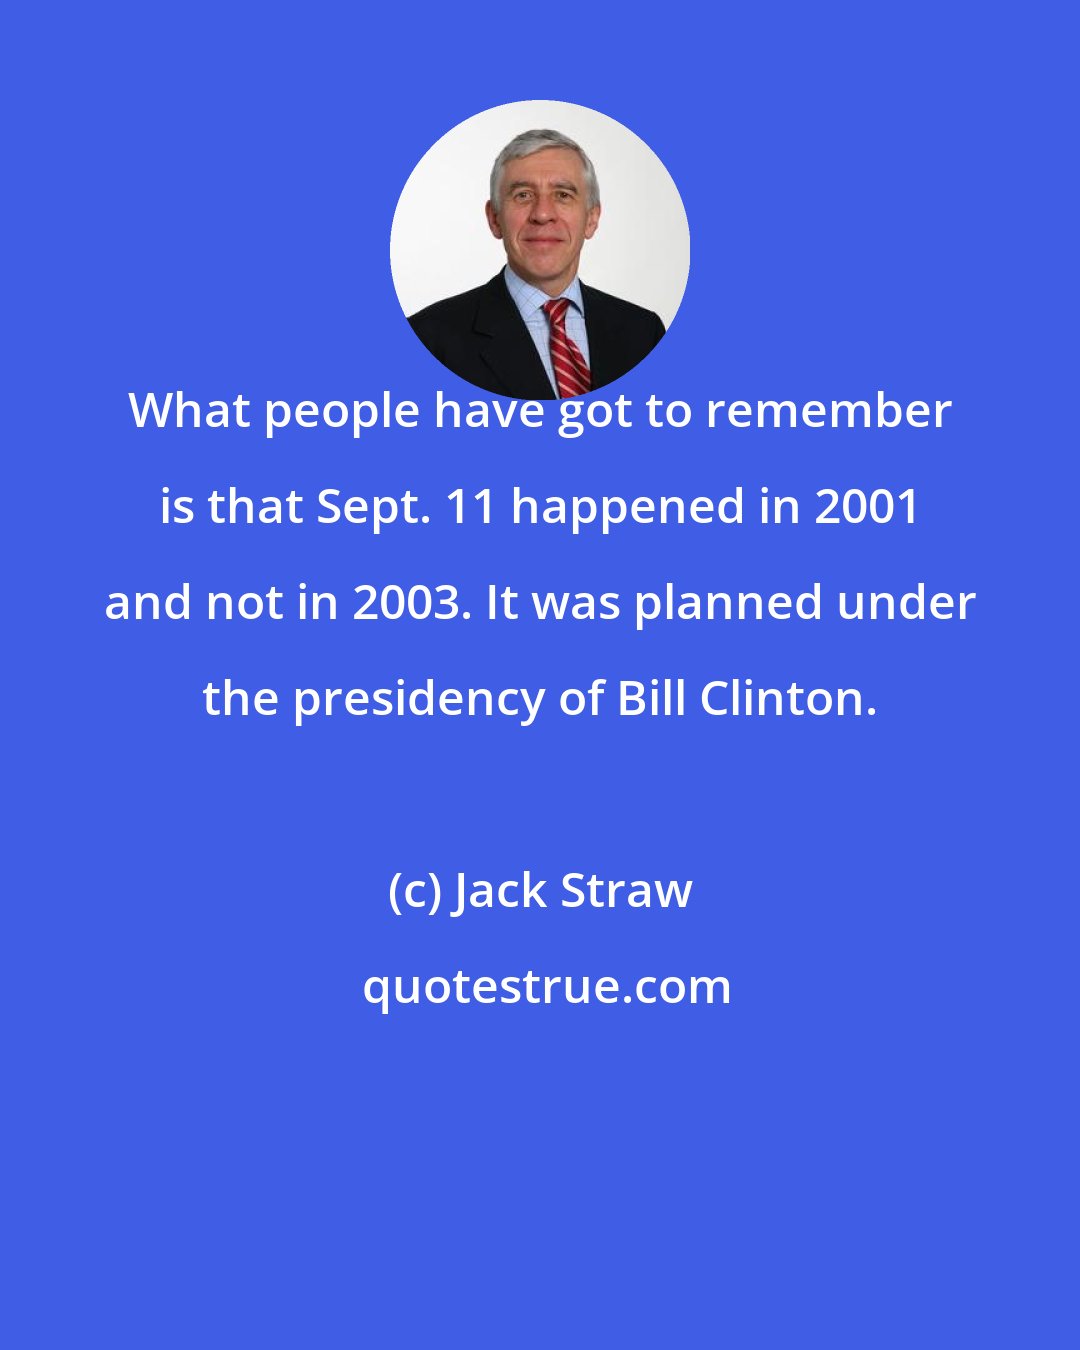 Jack Straw: What people have got to remember is that Sept. 11 happened in 2001 and not in 2003. It was planned under the presidency of Bill Clinton.